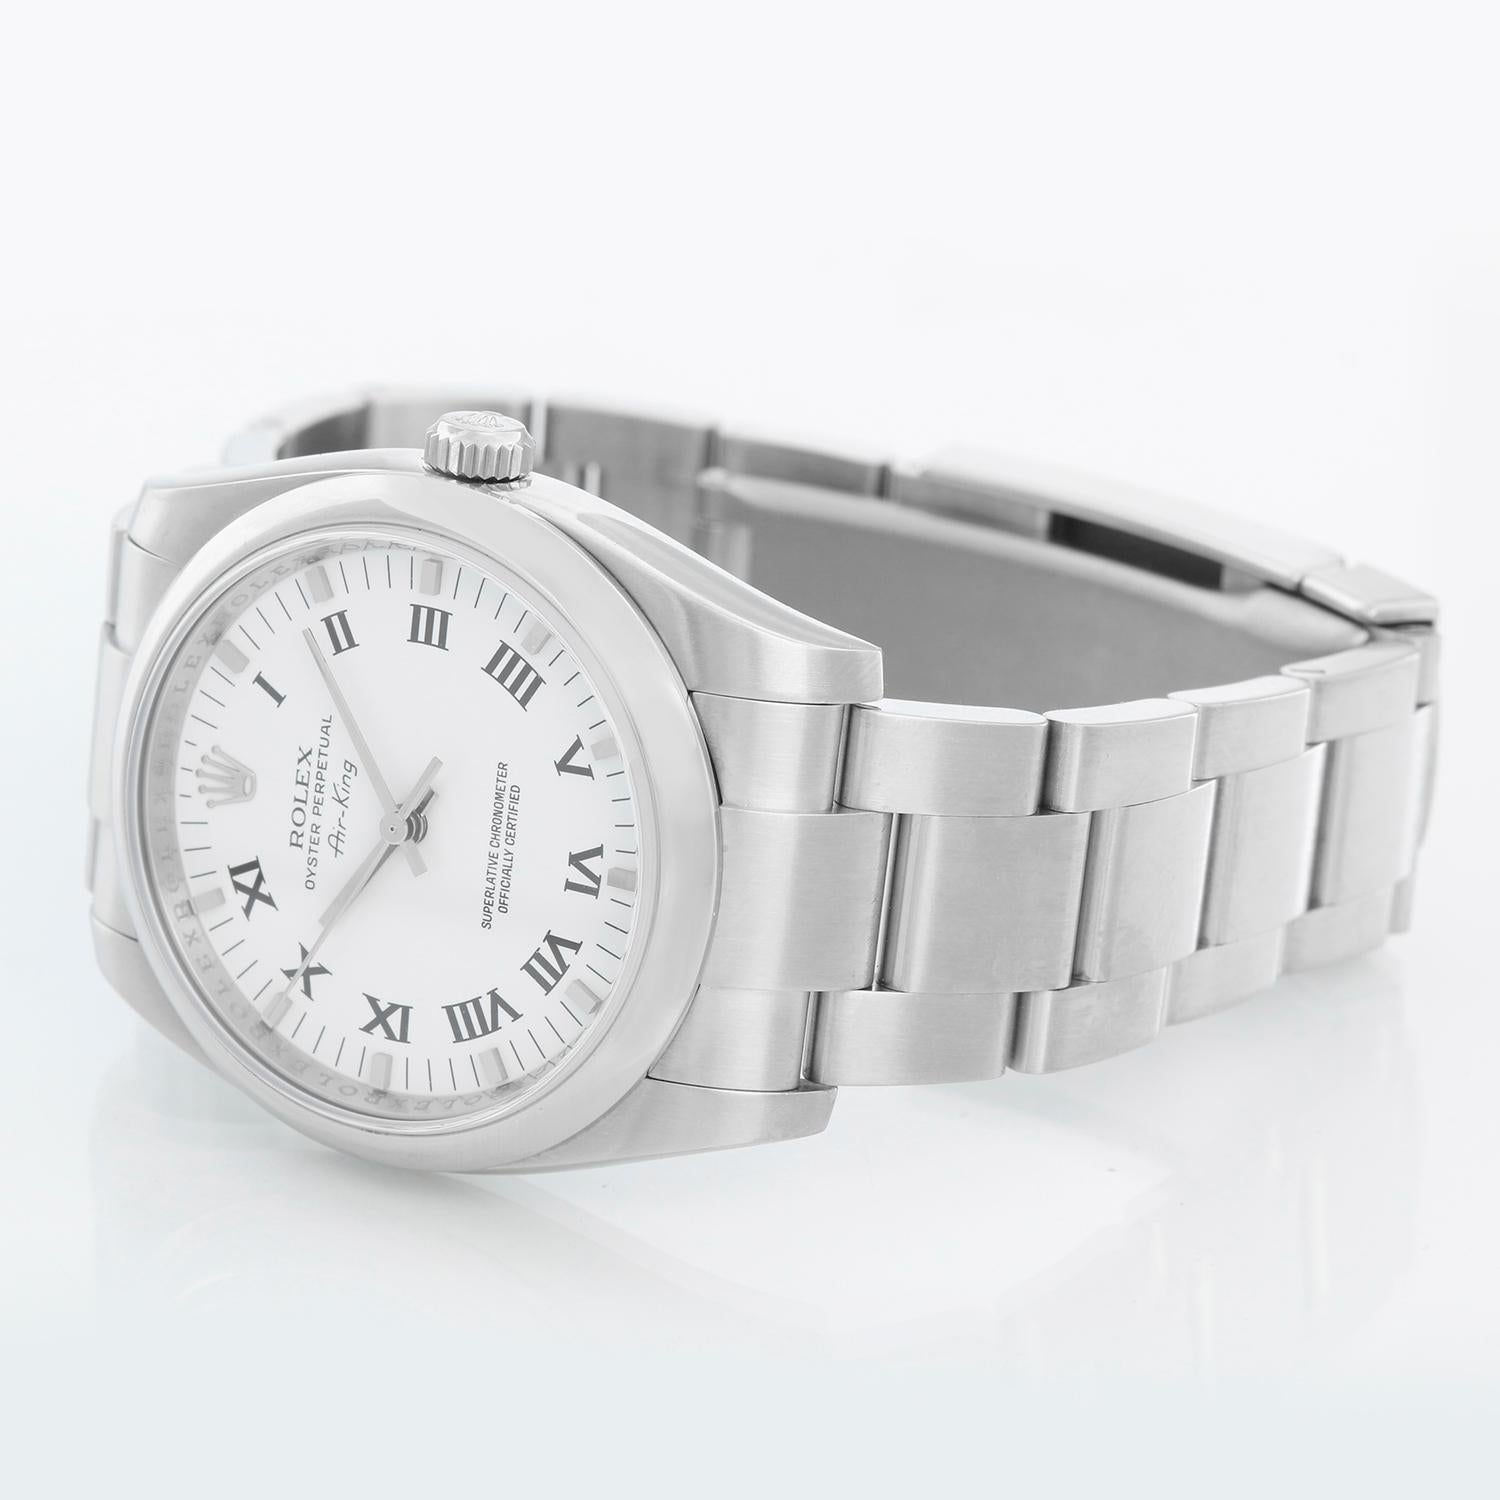 Rolex Air-King Men's Stainless Steel White Dial Watch 114200 - Automatic winding, 31 jewels, no-date, sapphire crystal. Stainless steel case with stainless steel smooth bezel (34mm diameter). White dial with black roman numerals. Stainless steel